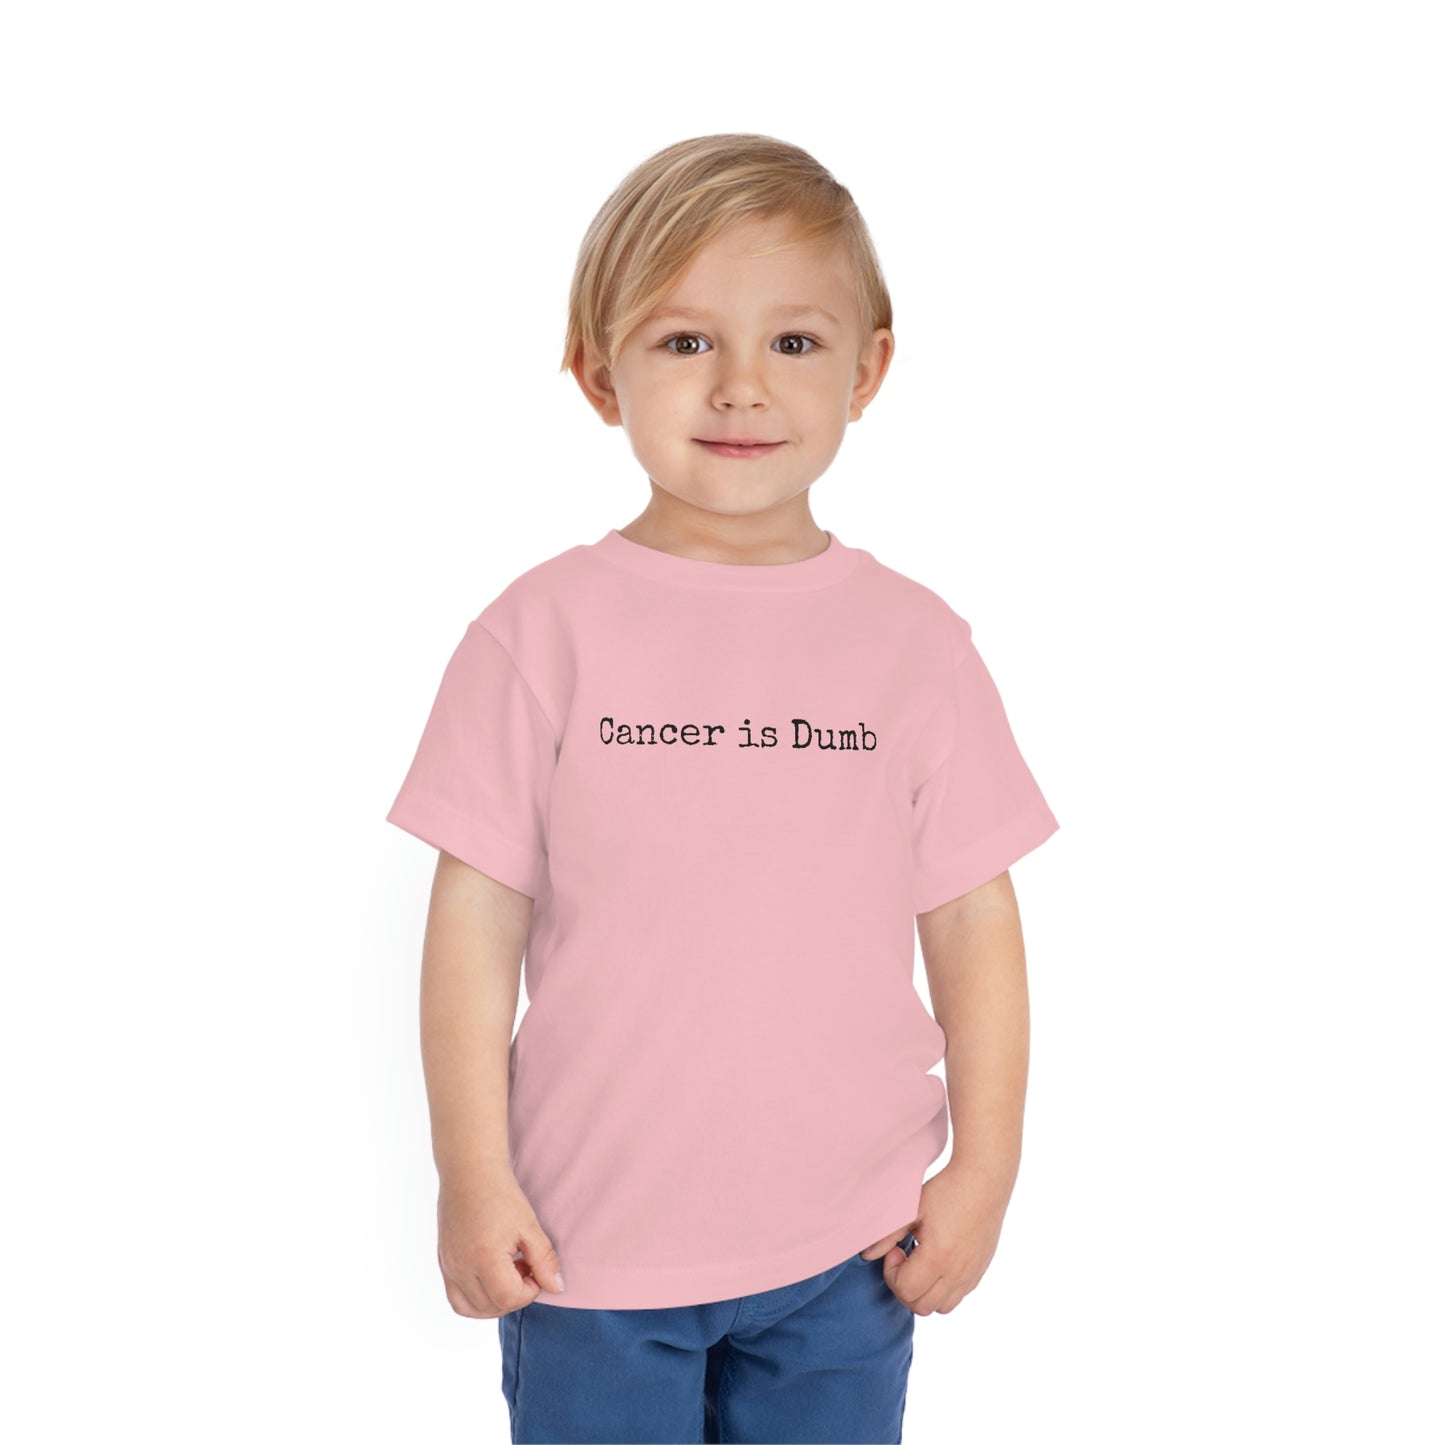 Toddler Short Sleeve Tee T Shirt Childrens tshirt Anti Cancer Cancer is Dumb Survivor Support Humorous Funny Kids Apparel